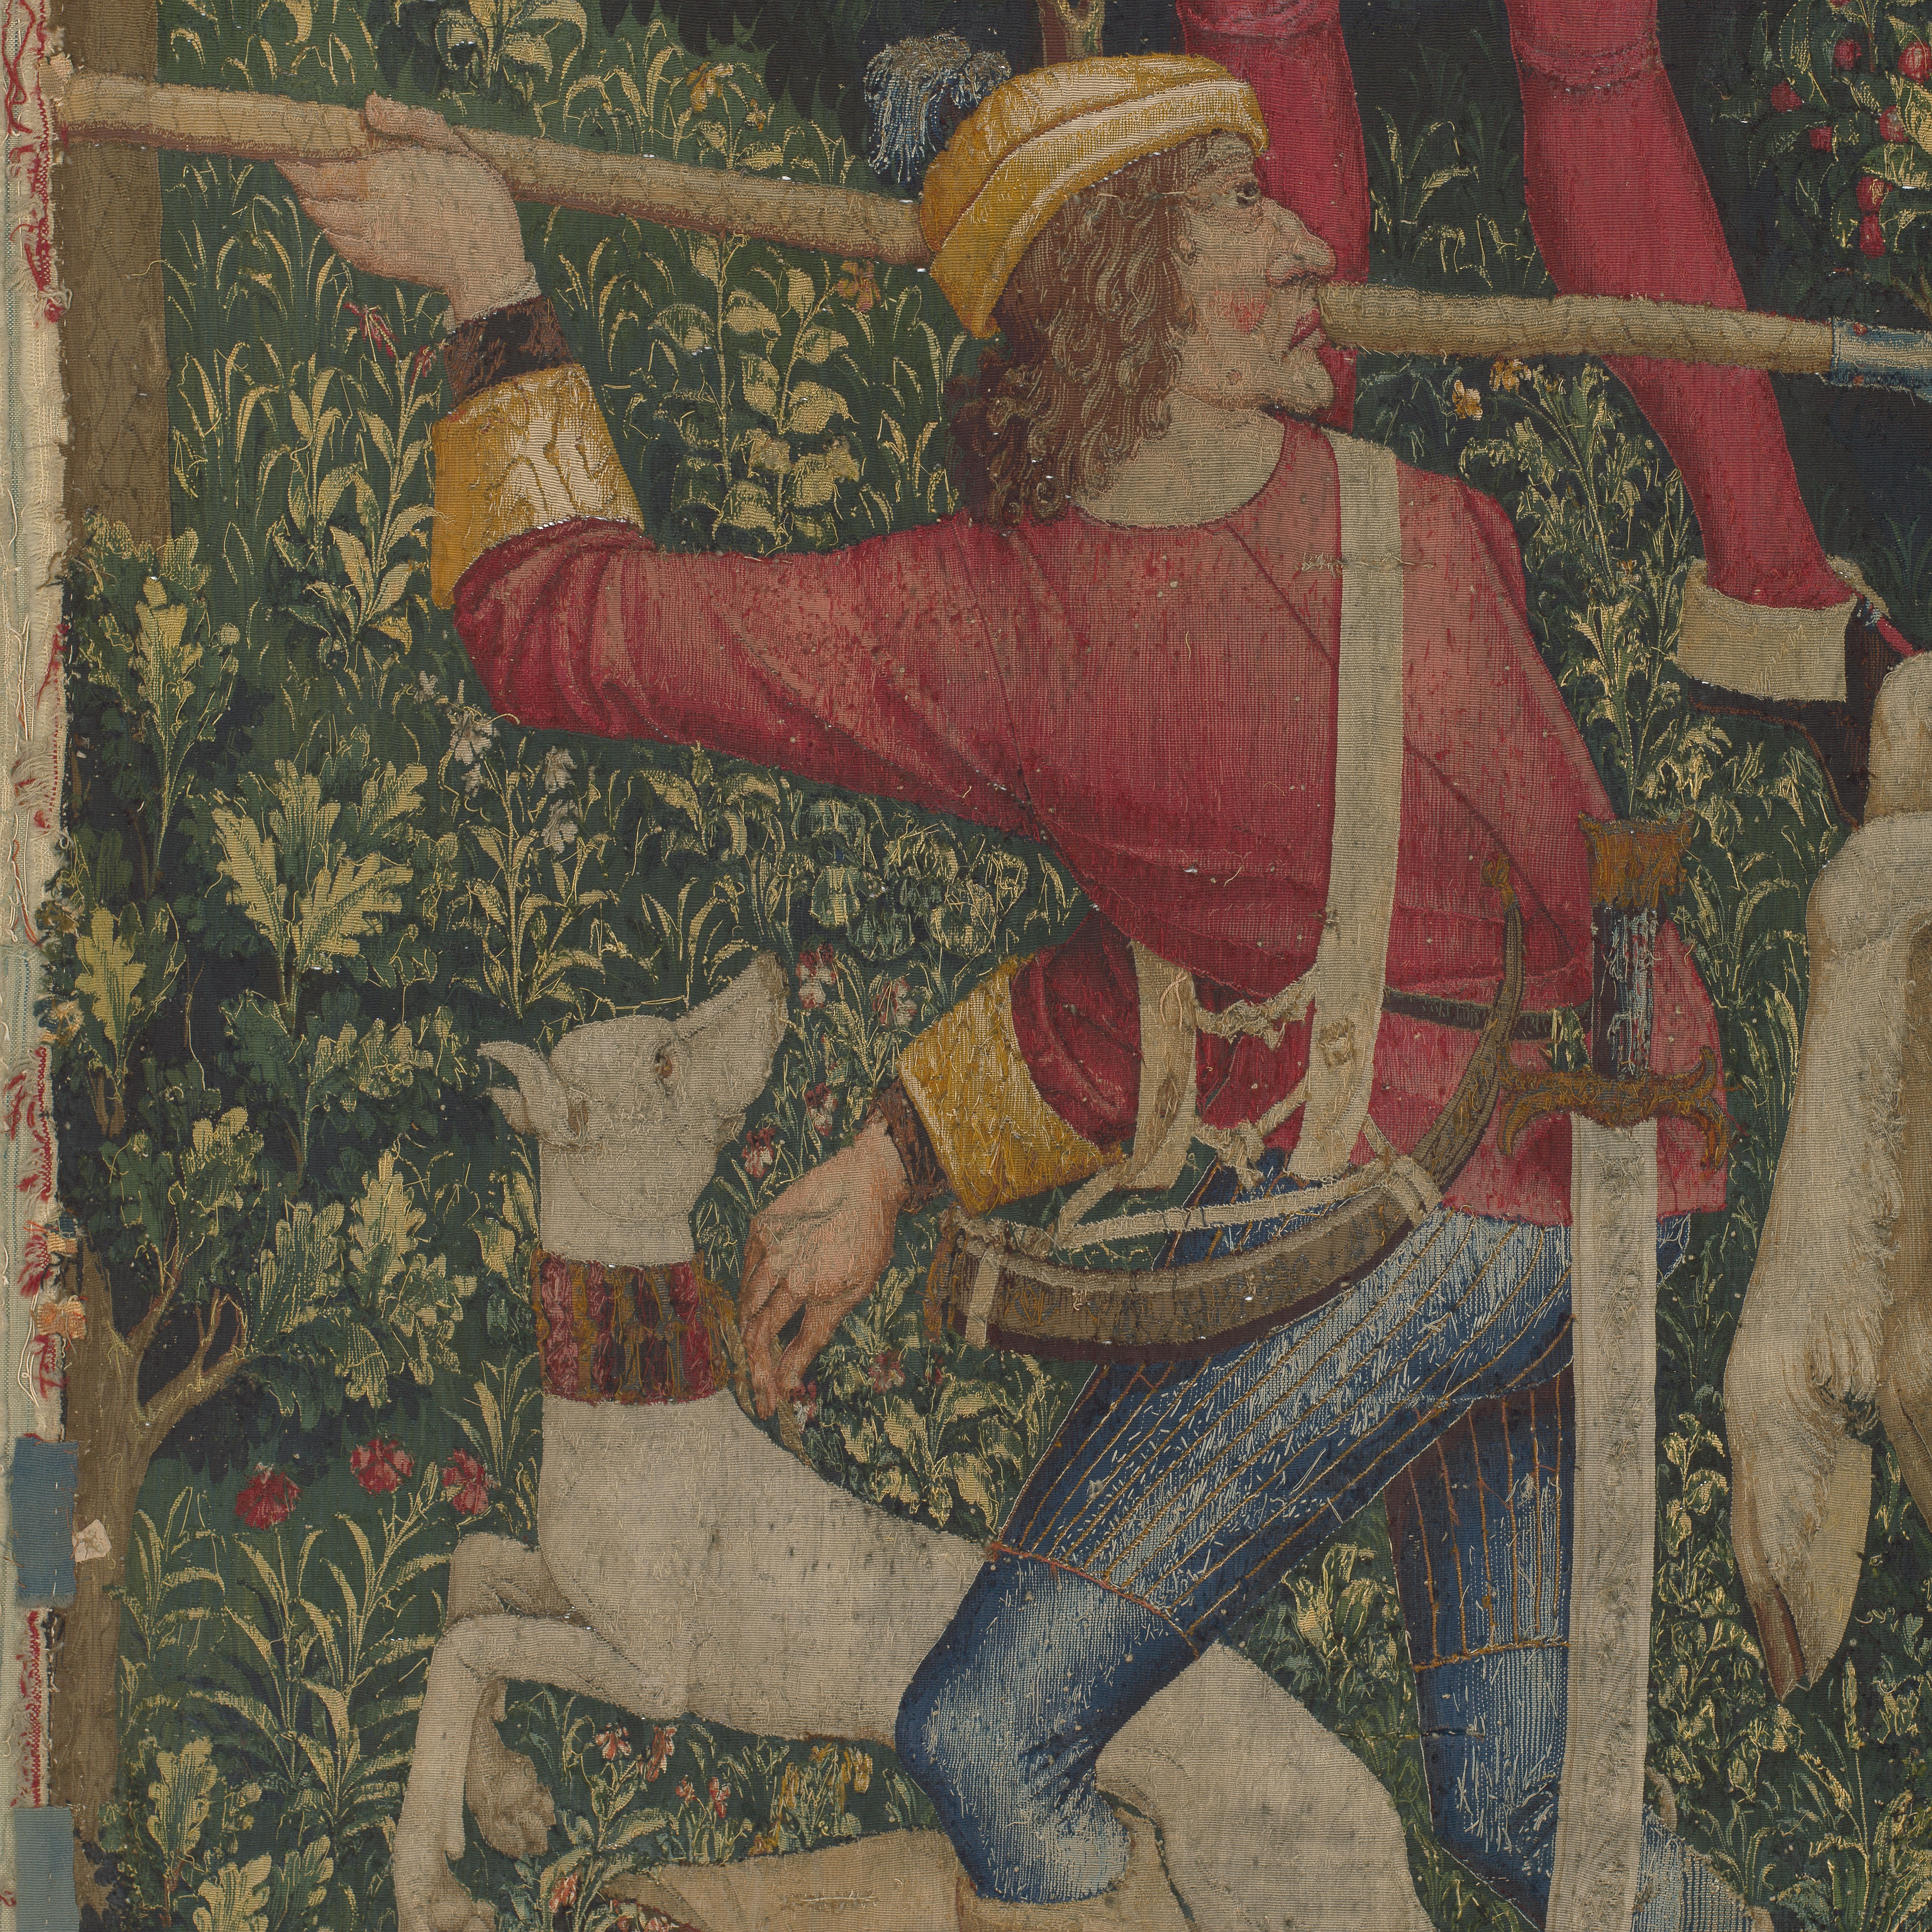 The Unicorn is Attacked (from the Unicorn Tapestries